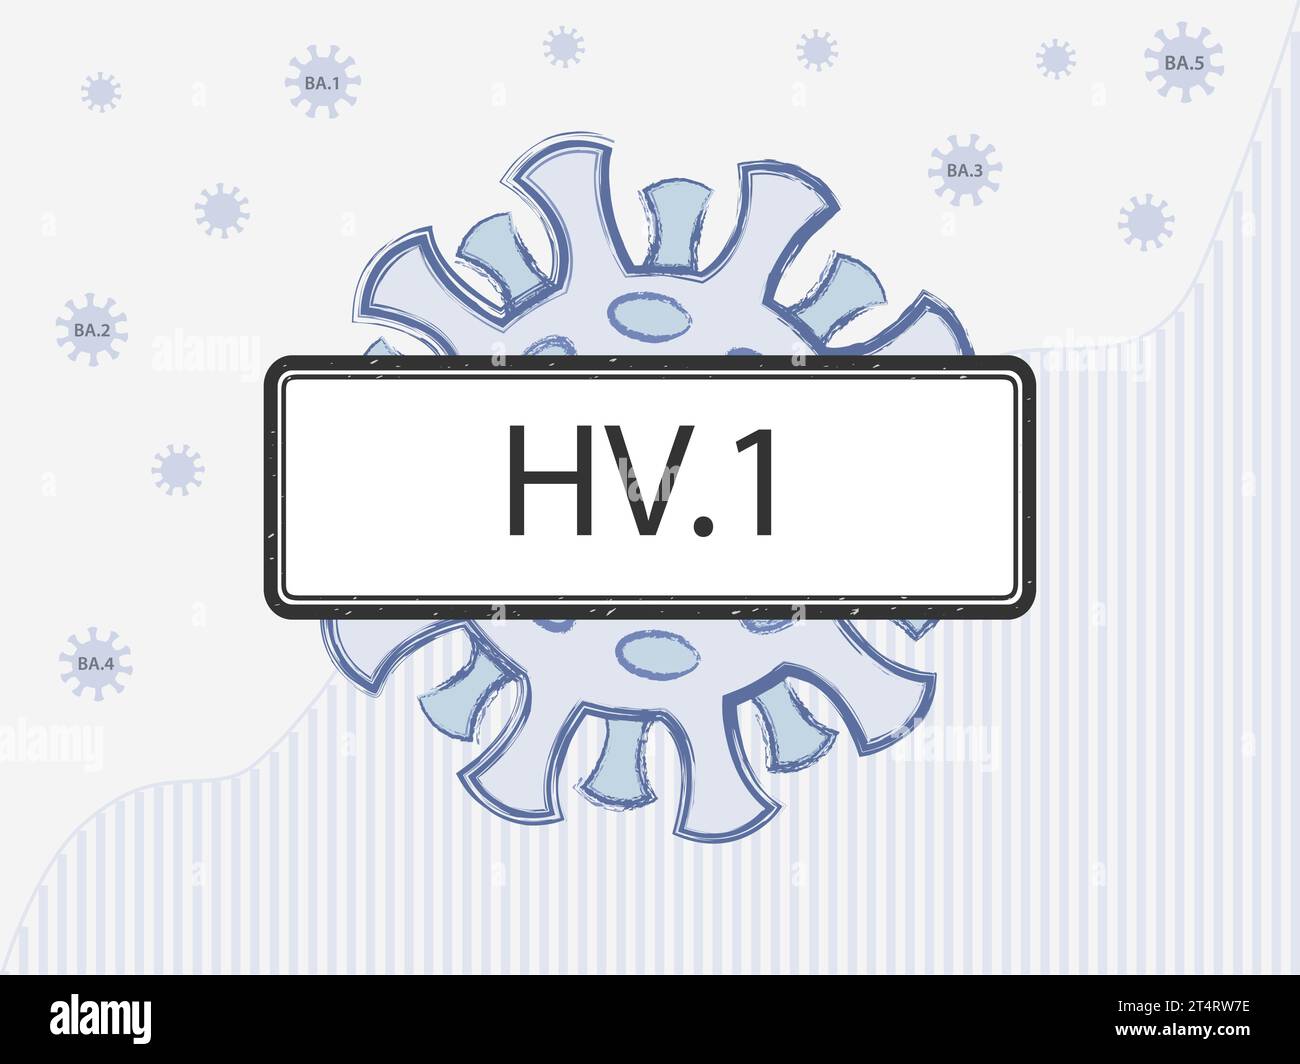 HV.1 in the sign. Coronovirus with spike proteins of a different colors symbolizing mutations. New Omicron subvariant against the background of covid. Stock Vector